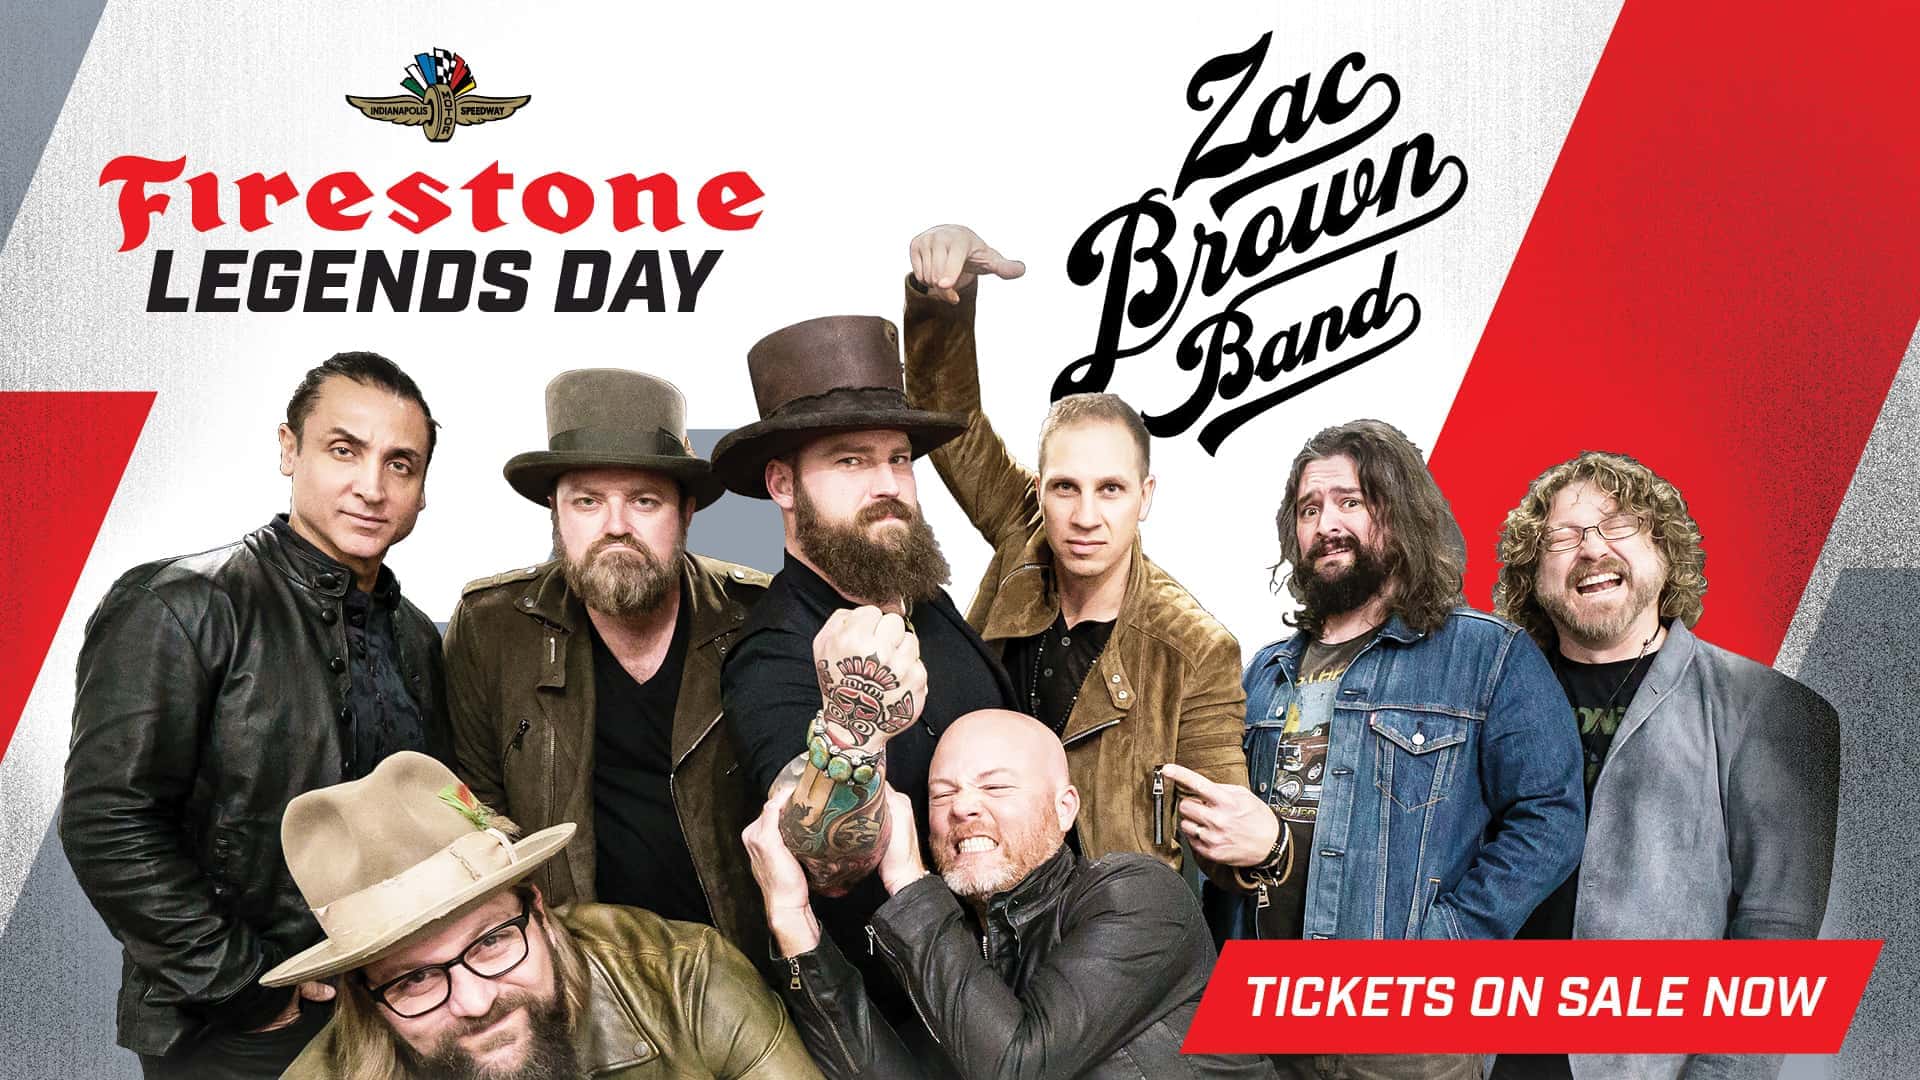 Zac Brown Band to Headline Firestone Legends Day Concert at IMS 97.1